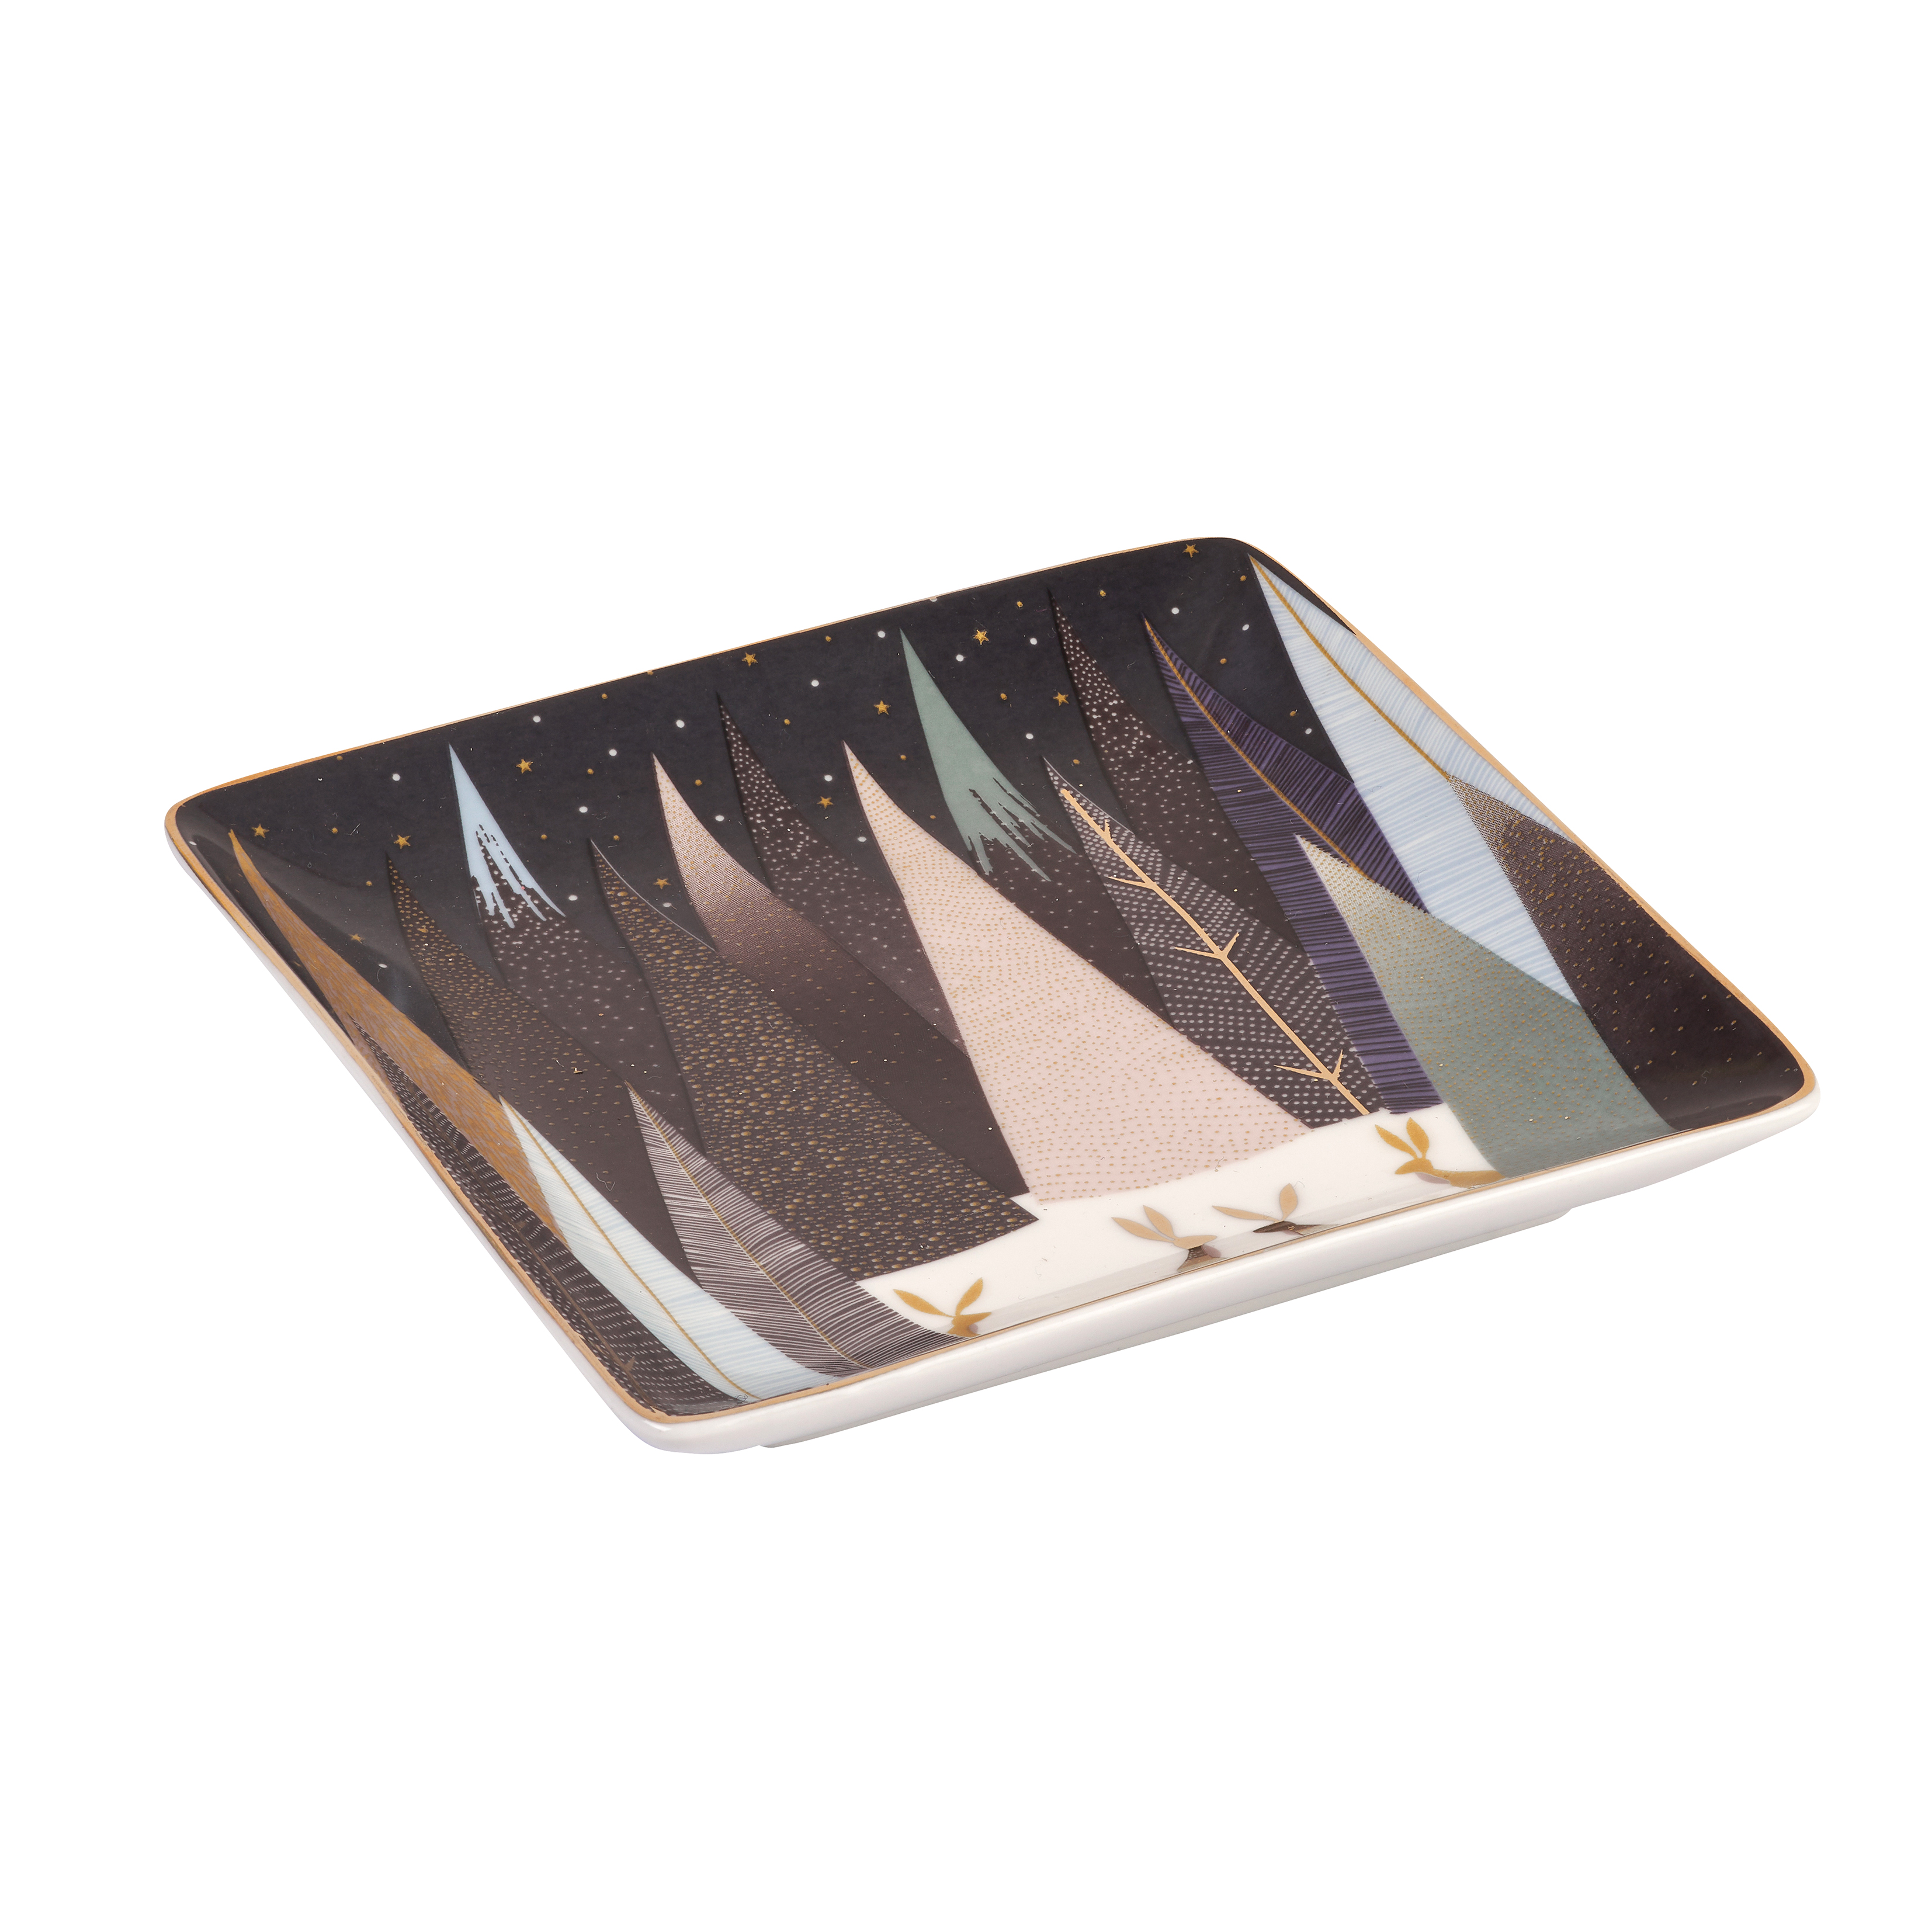 Sara Miller London Frosted Pines Set of 3 Square Trays 4.5 Inch image number null